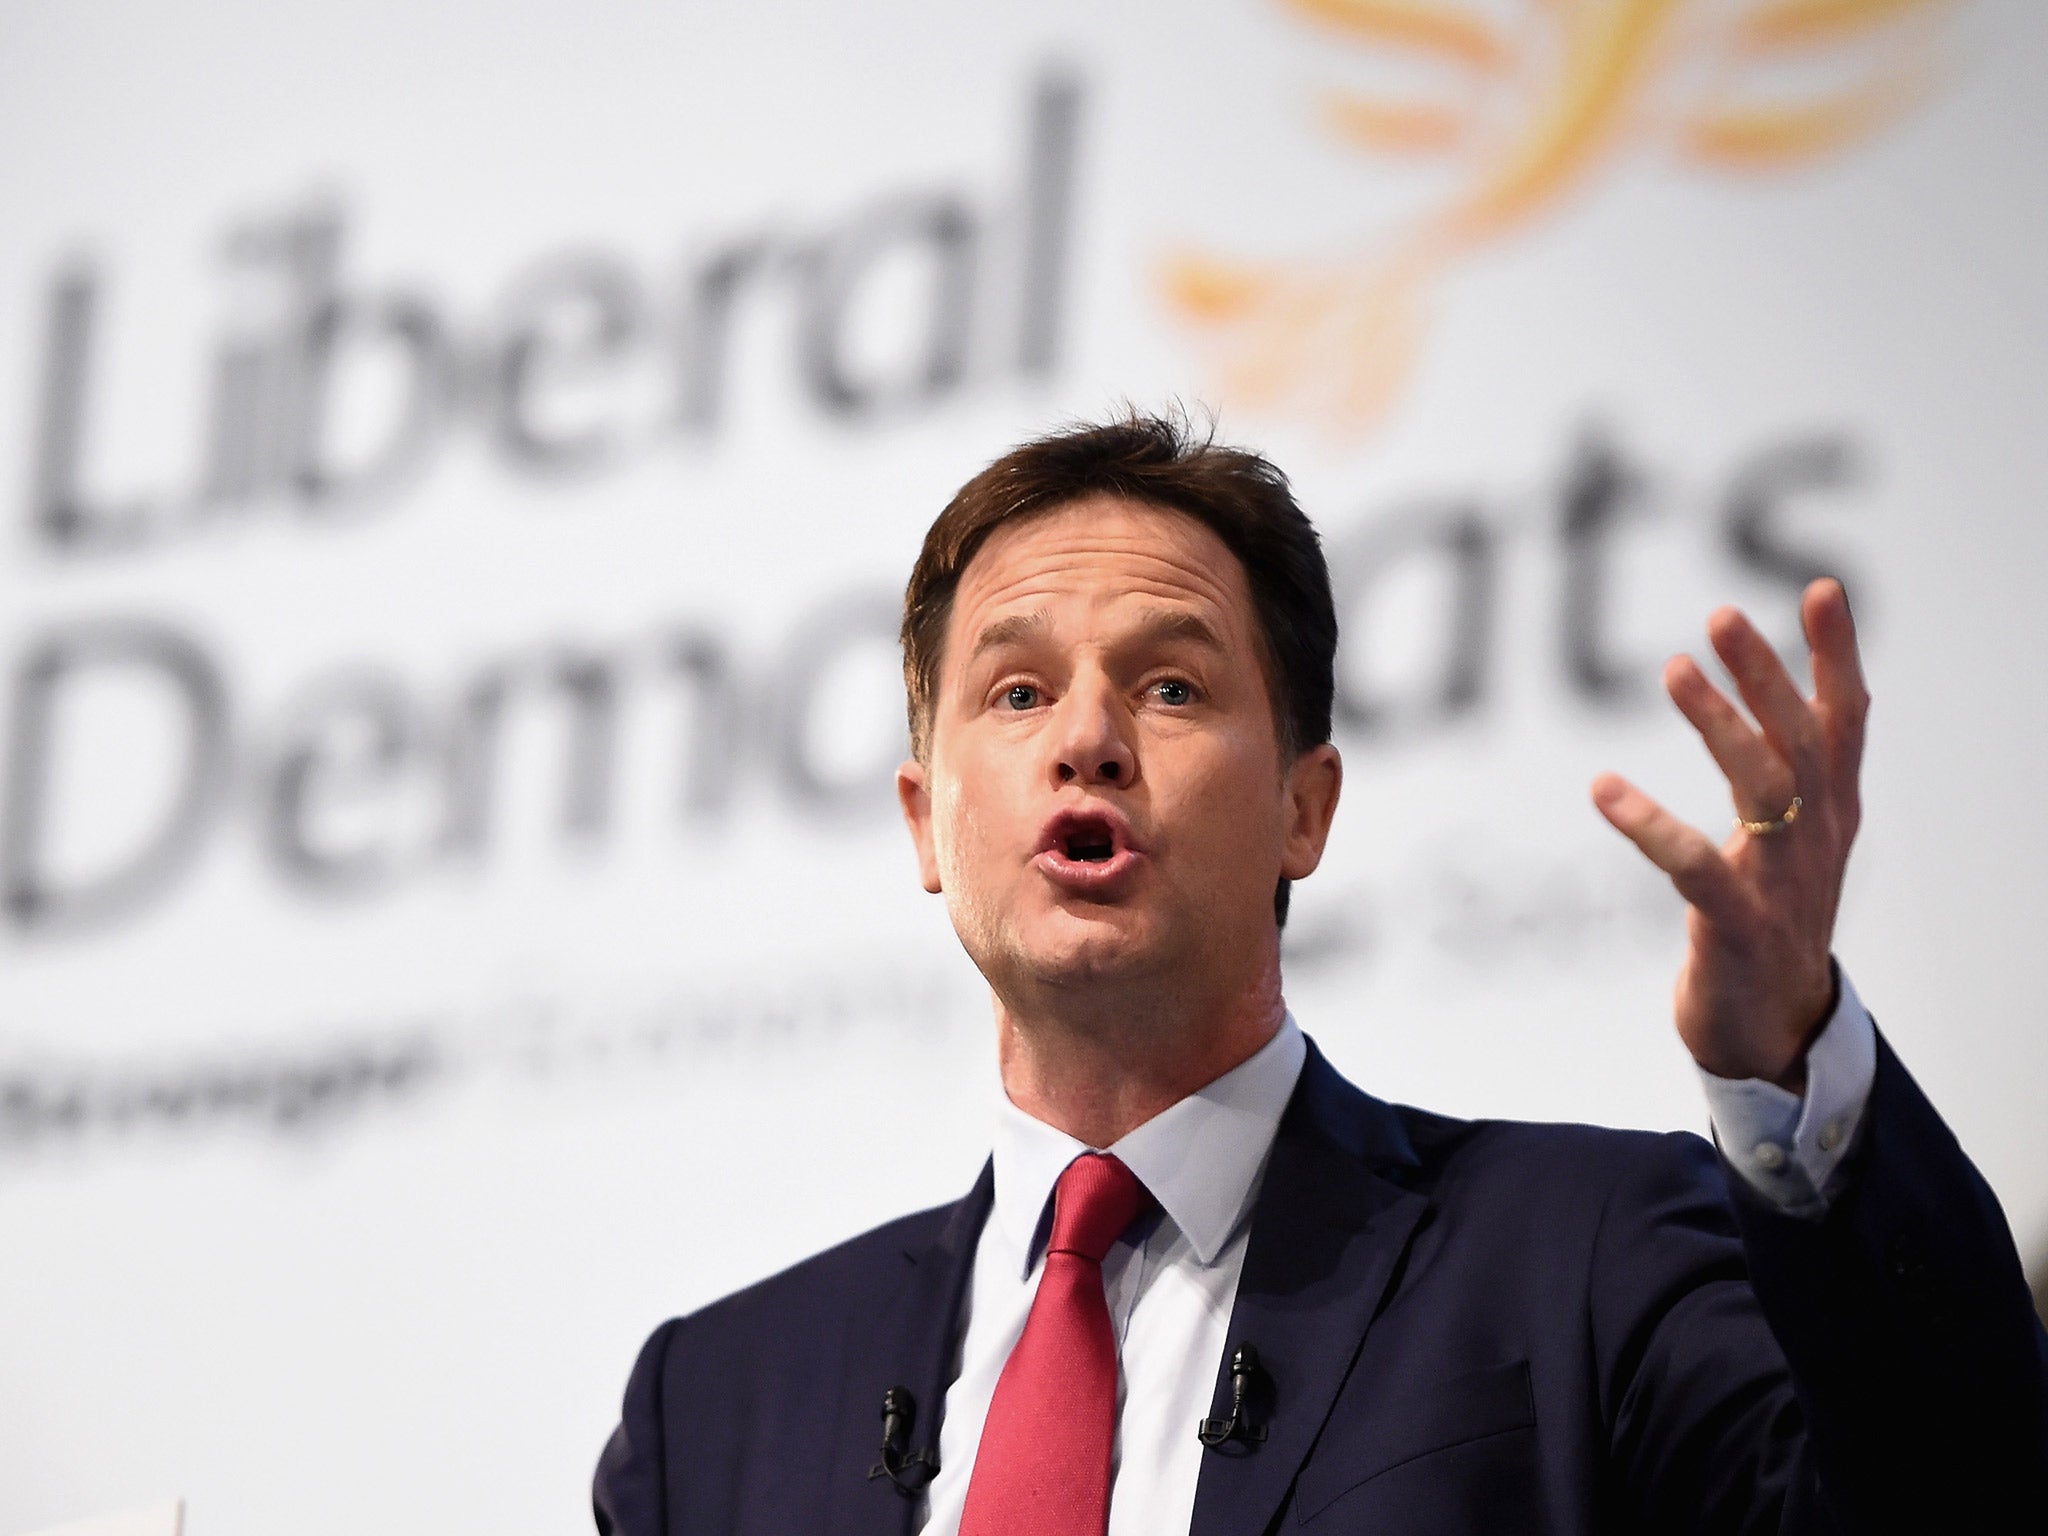 Nick Clegg isn't ready for a return to frontbench politics just yet